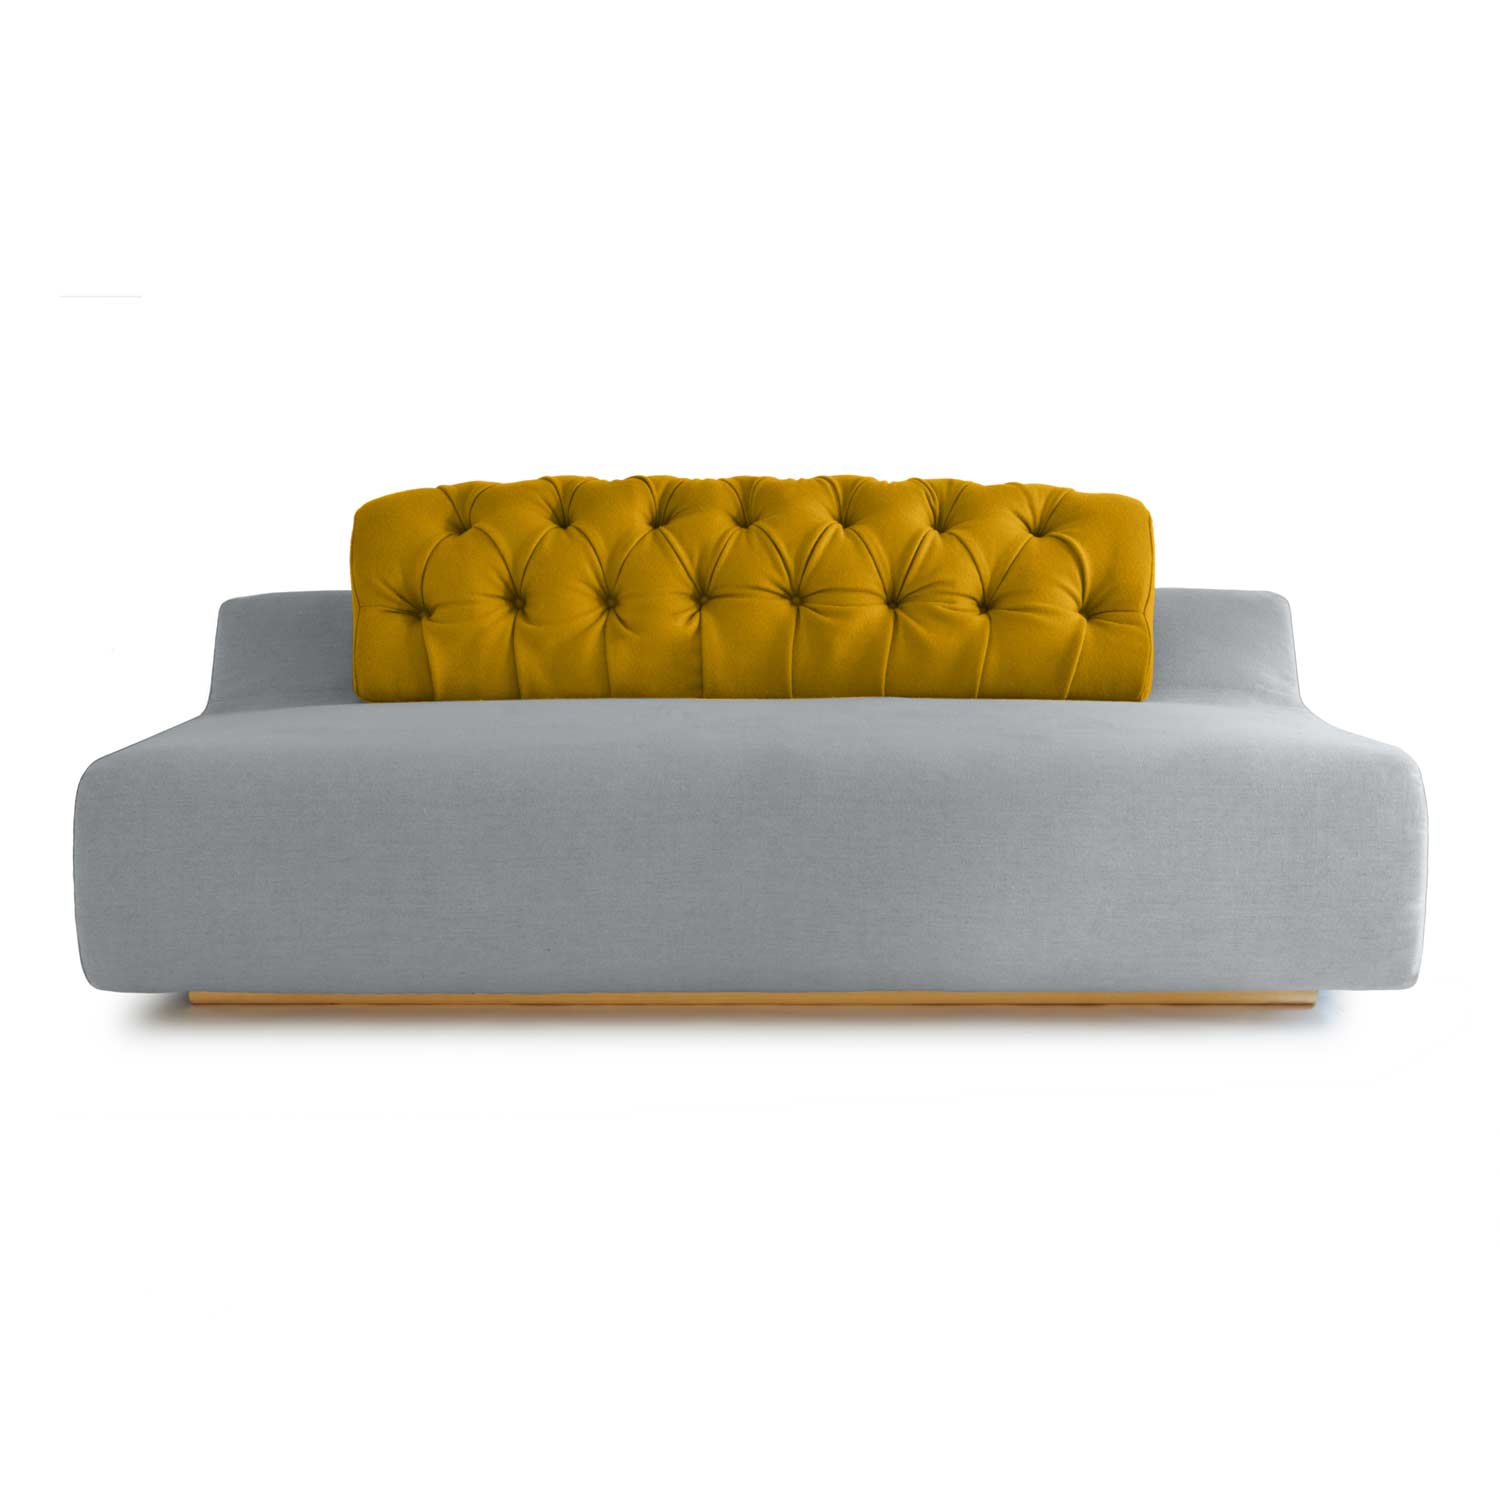 baco eco friendly two seater sofa in greay cotton fabric with mustard yellow velvet backrest